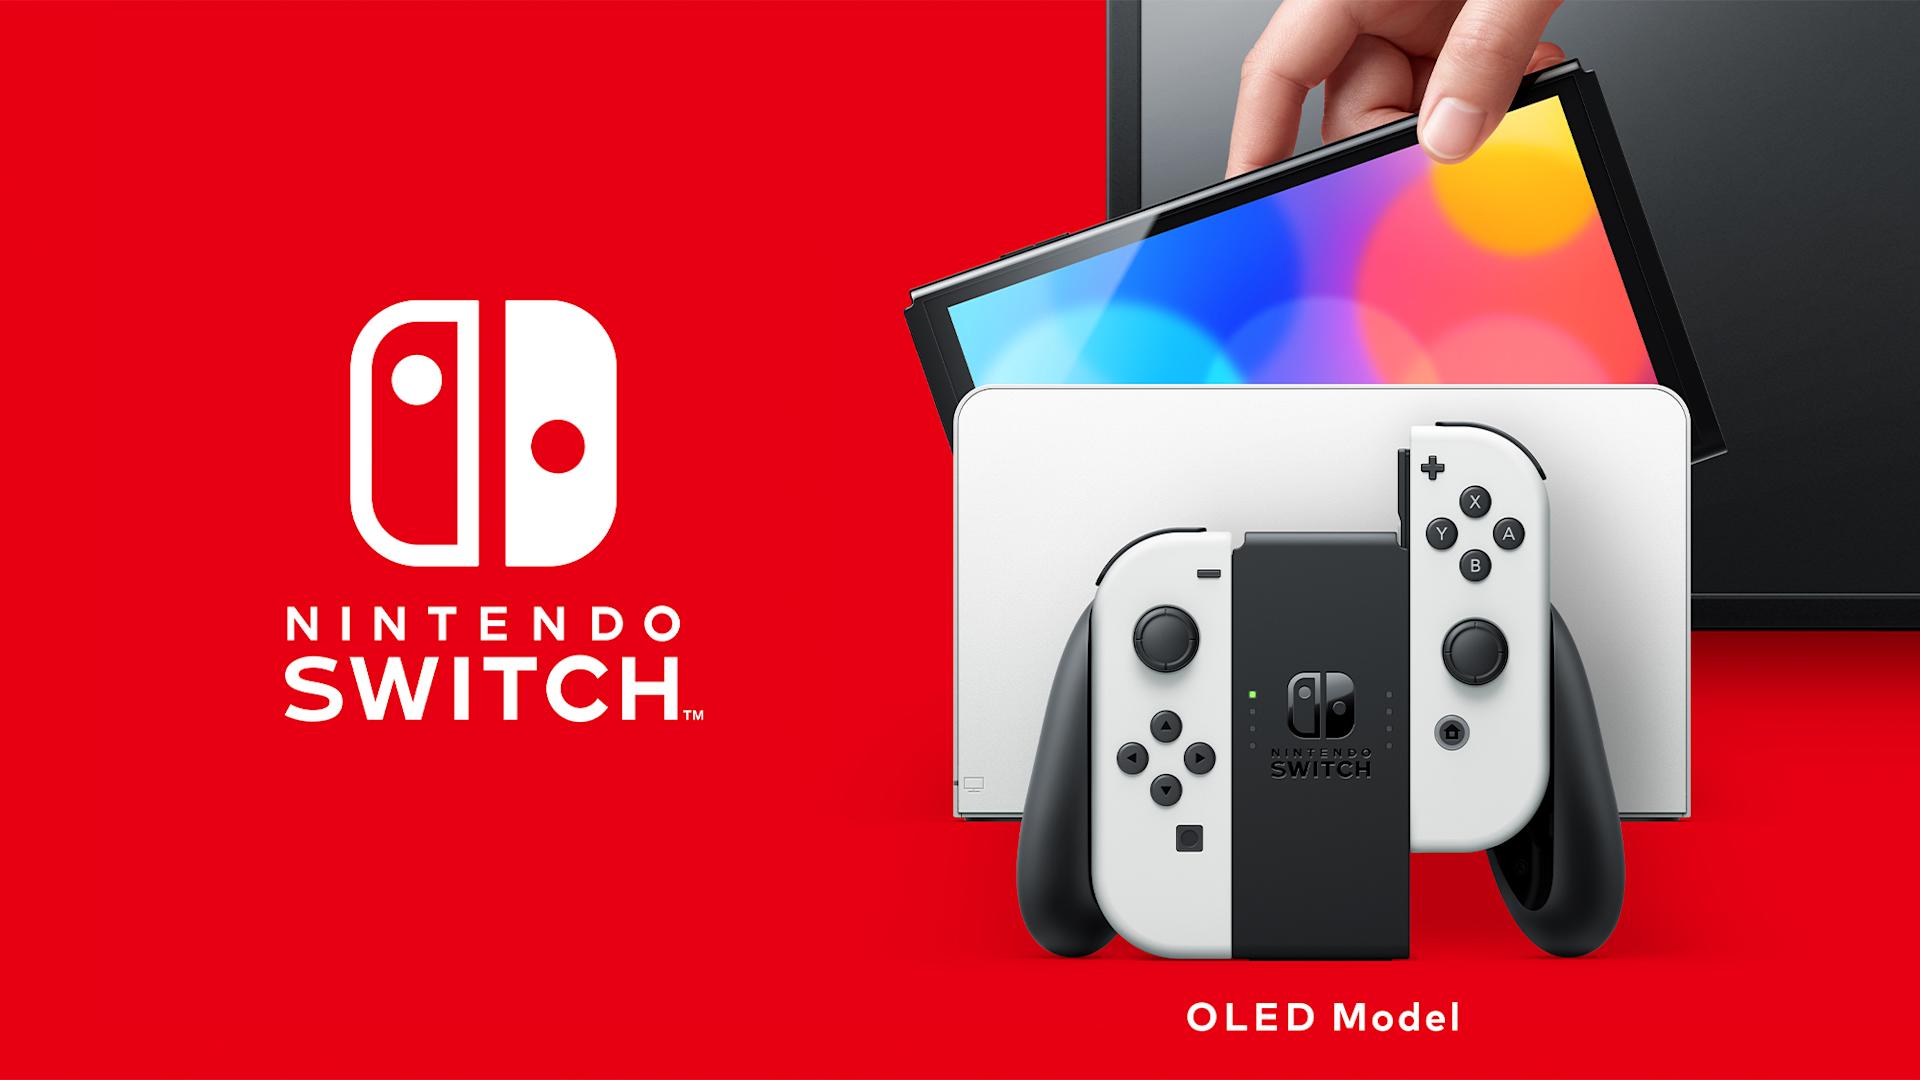 Nintendo Switch OLED (blue/red) - Nintendo Switch console - LDLC 3-year  warranty